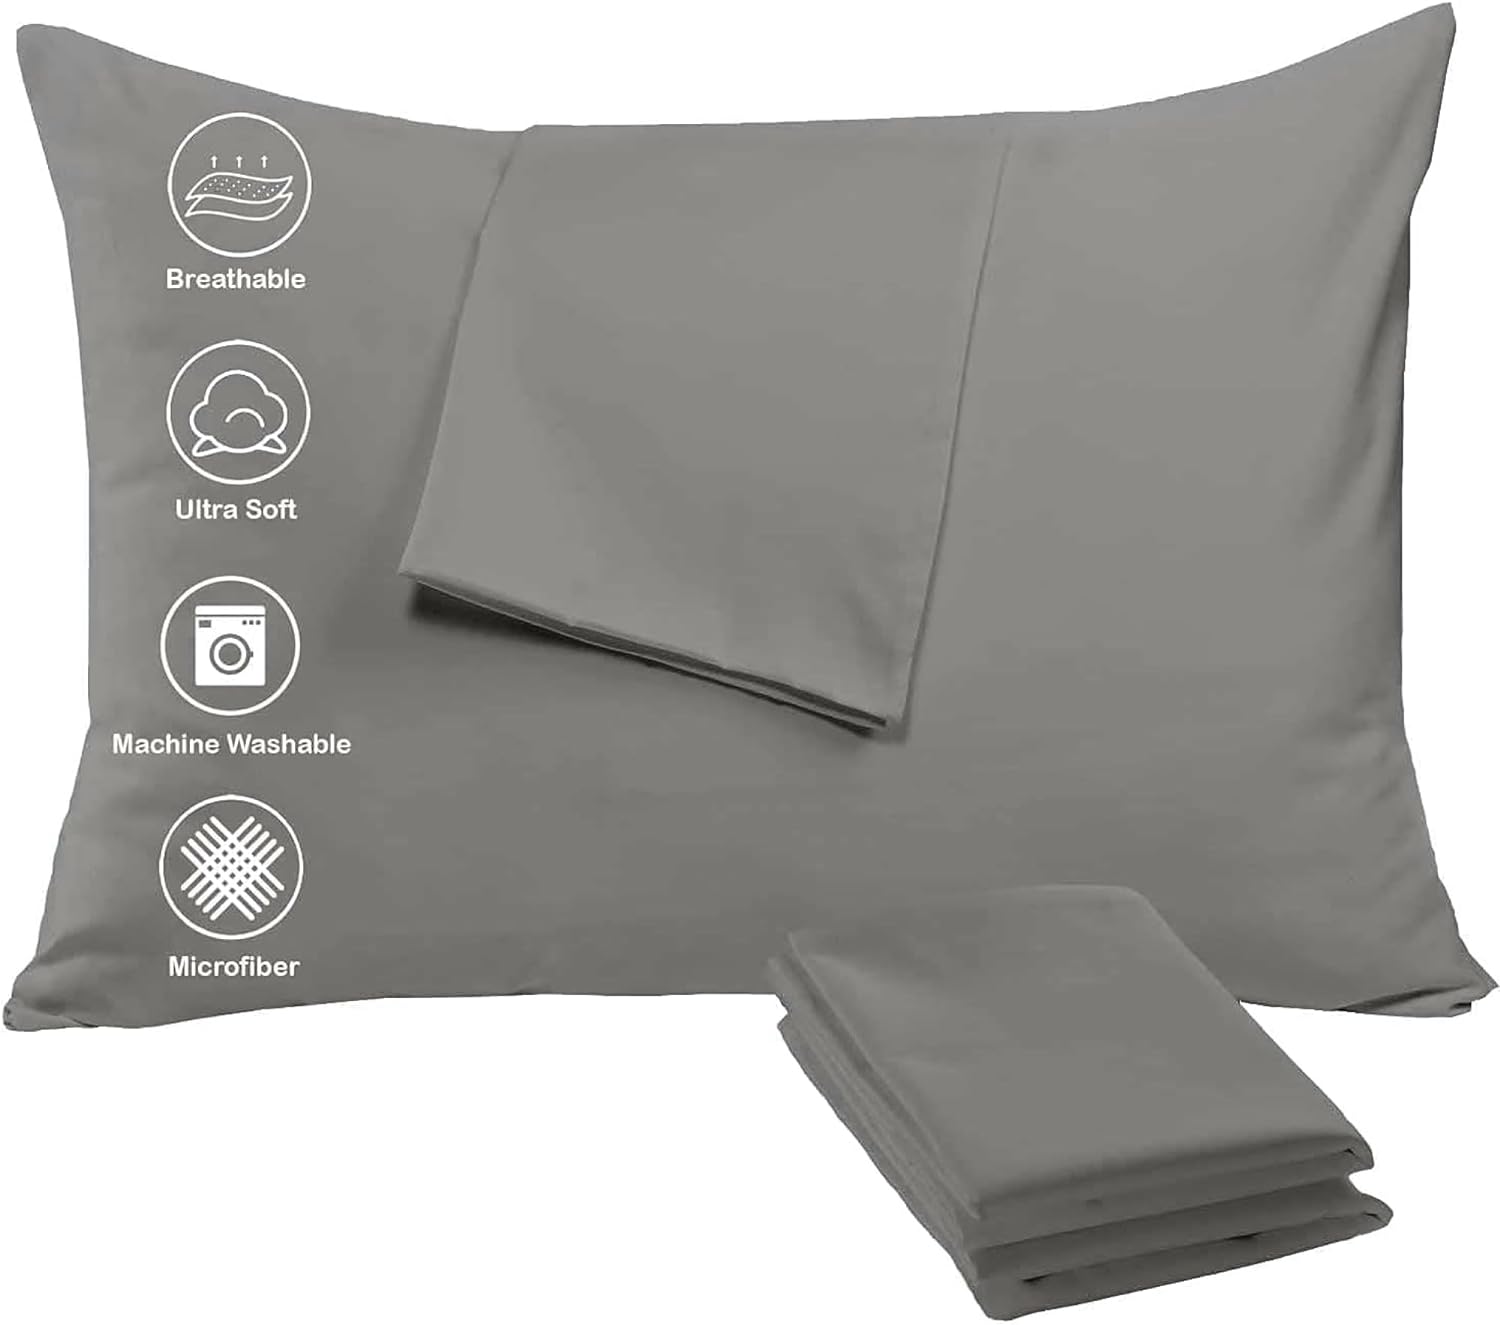 Niagara 4 Pack of Pillow Protectors with Zipper, Standard Size, Effective Dust Protection, Quiet, Stay in Place Pillow Covers, Breathable Case for Pillow Lifespan Extension (20x26 Inches, Grey)